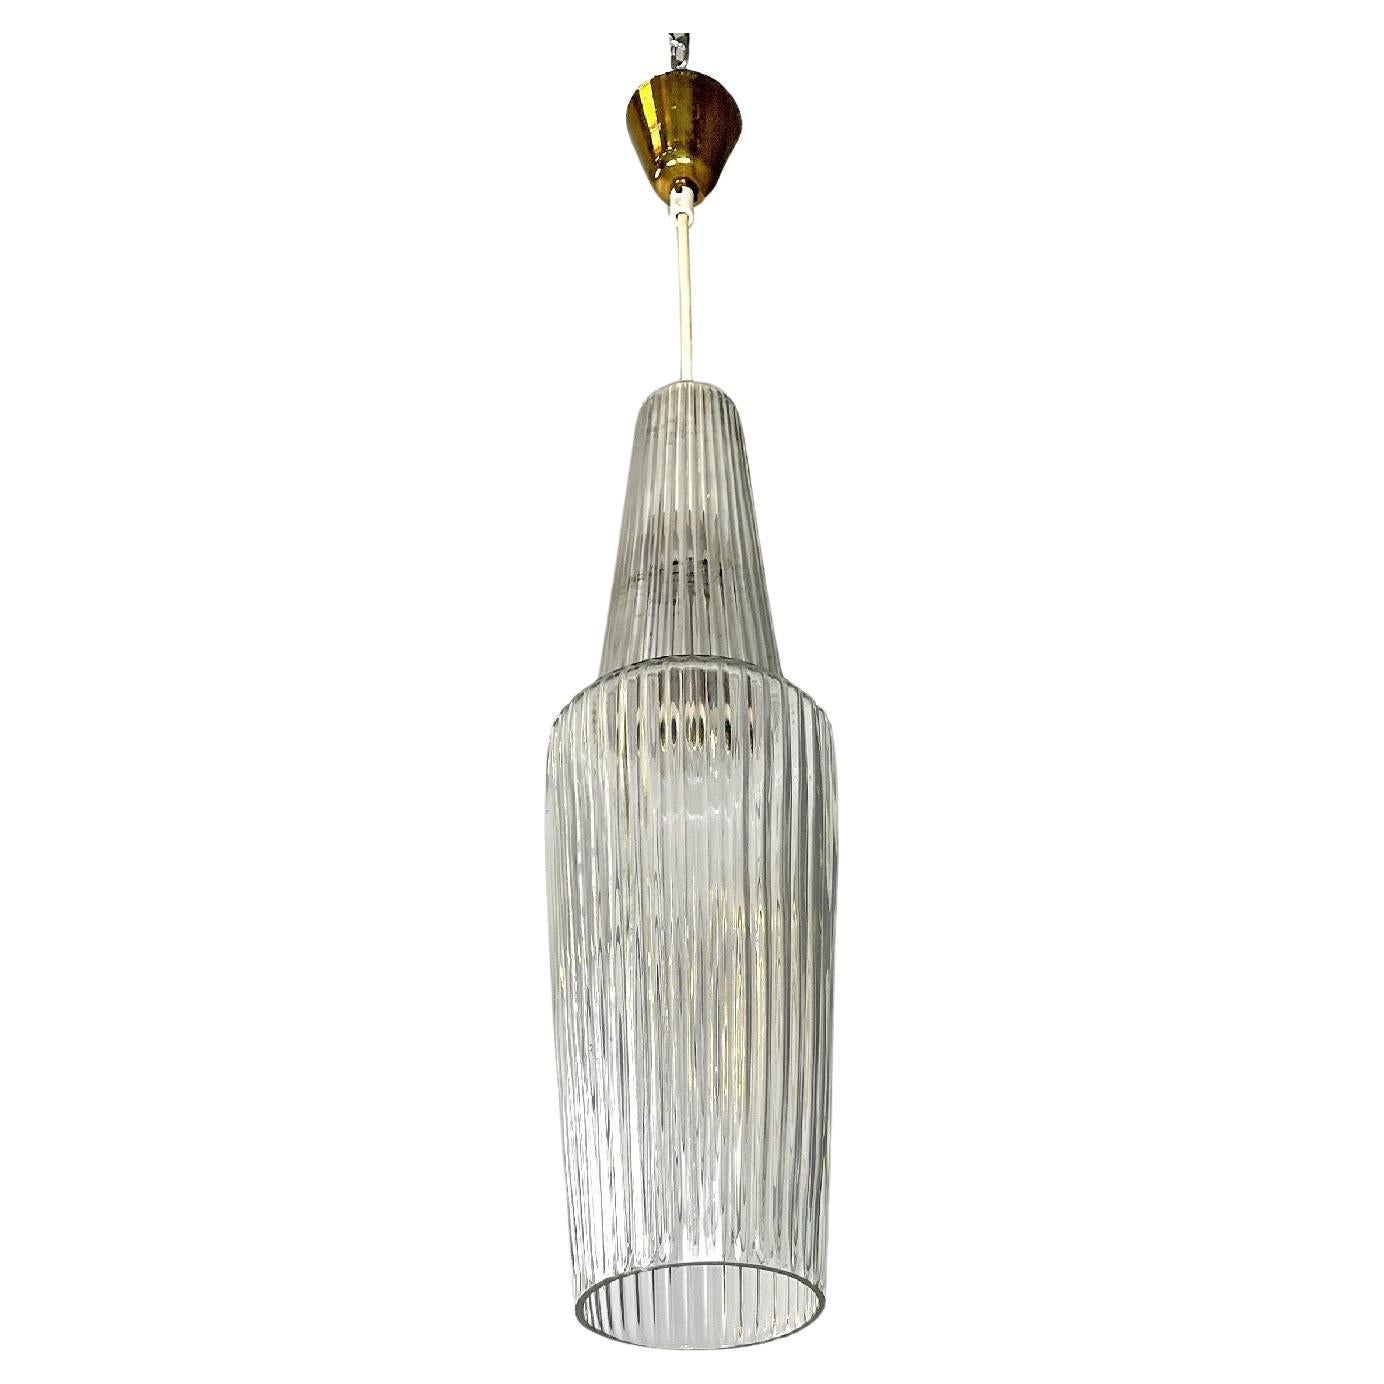 Italian mid-century modern golden plastic and fluted glass chandelier, 1950s For Sale